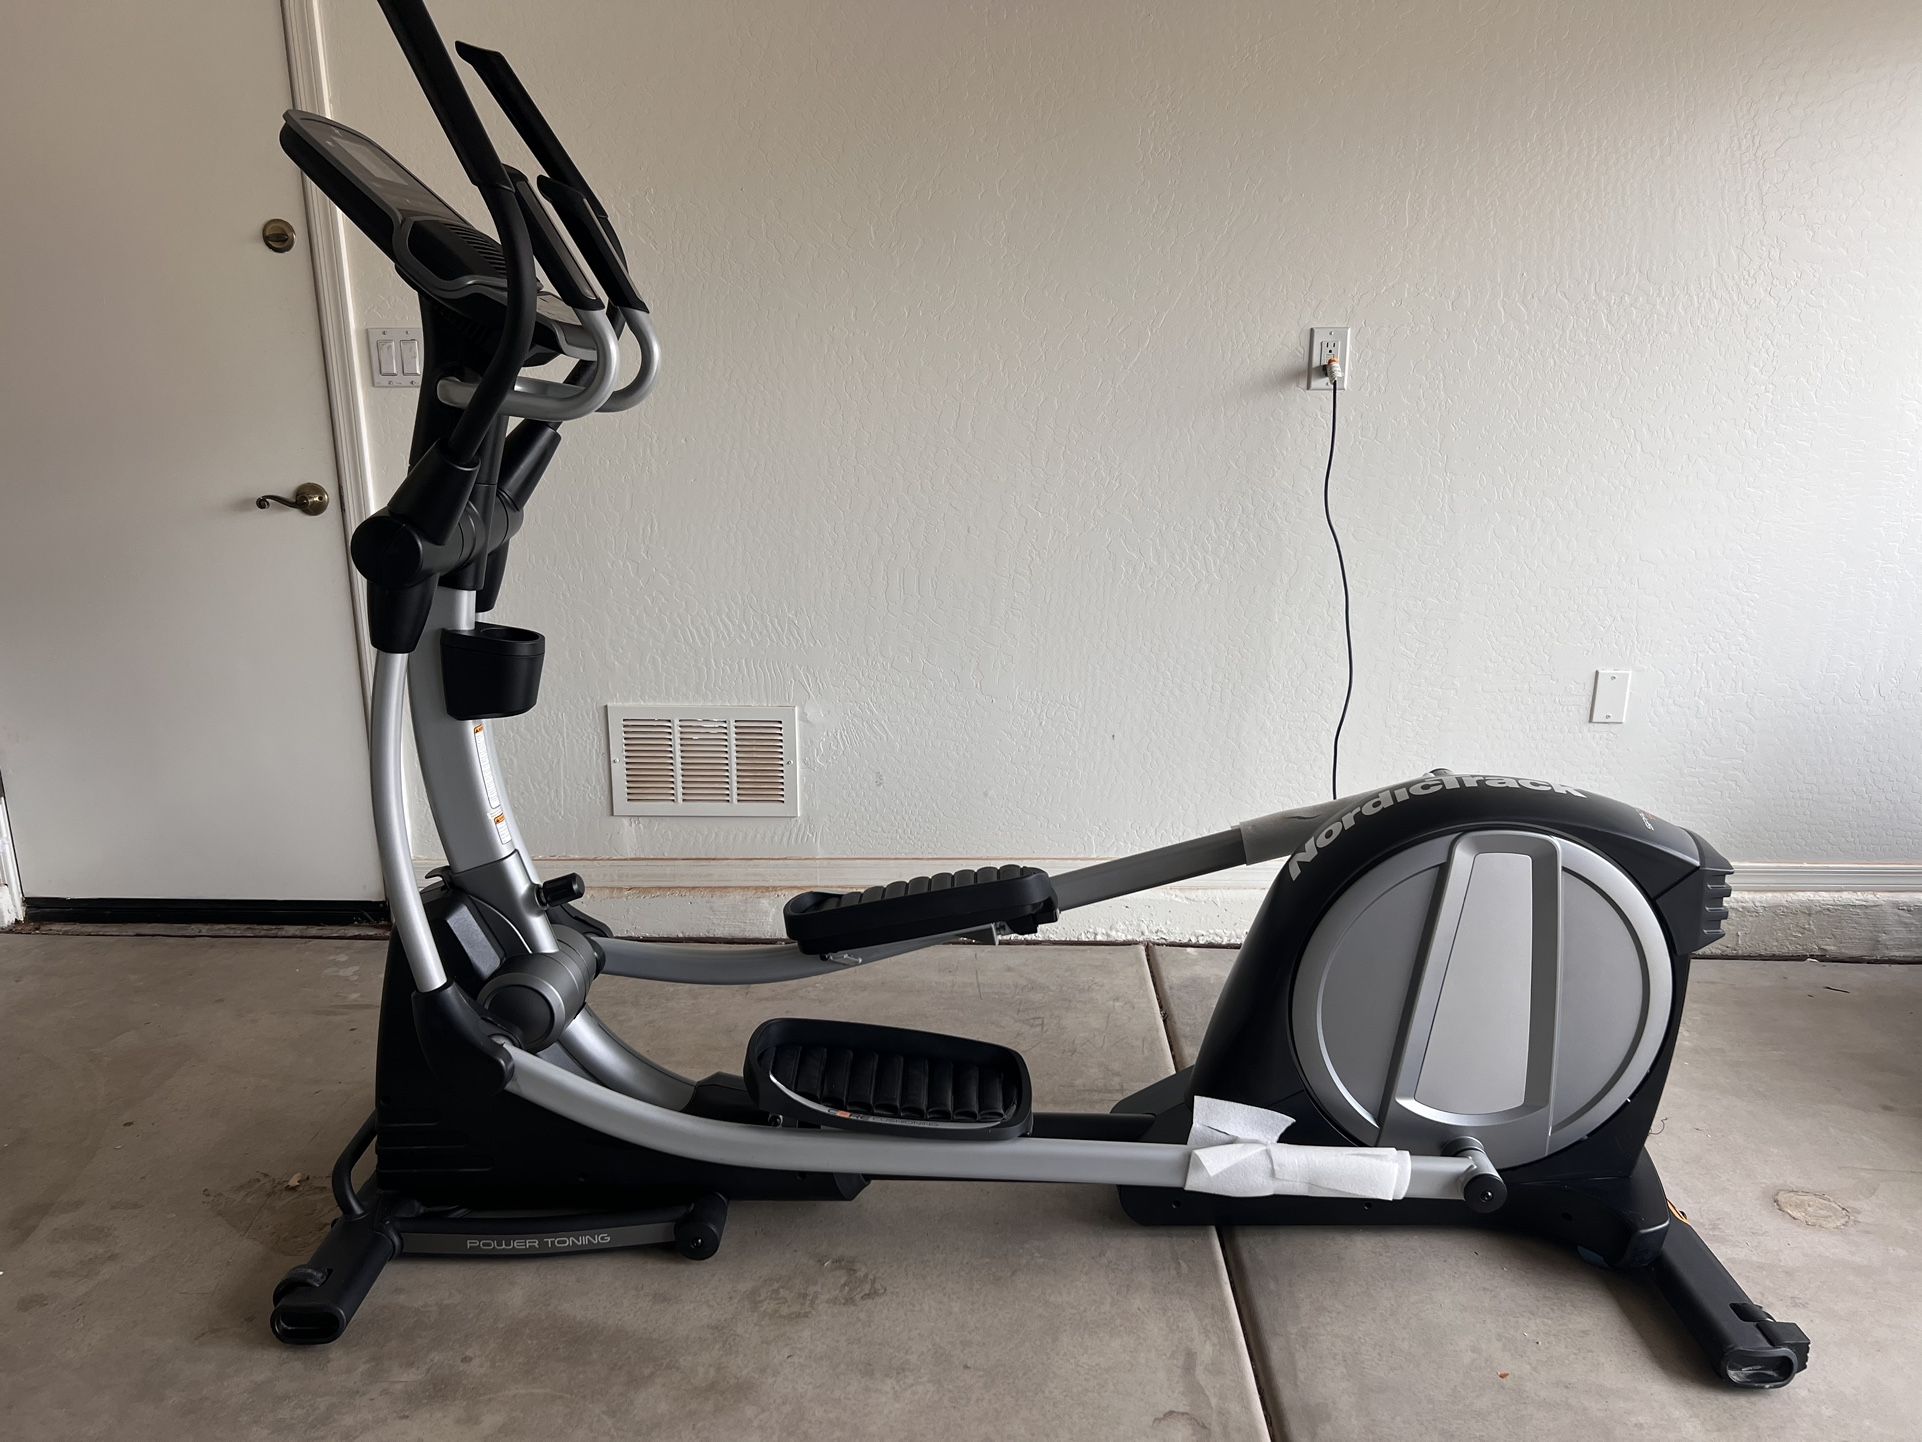 Nordic 7i Elliptical ( This Item Brand New Is $1299)